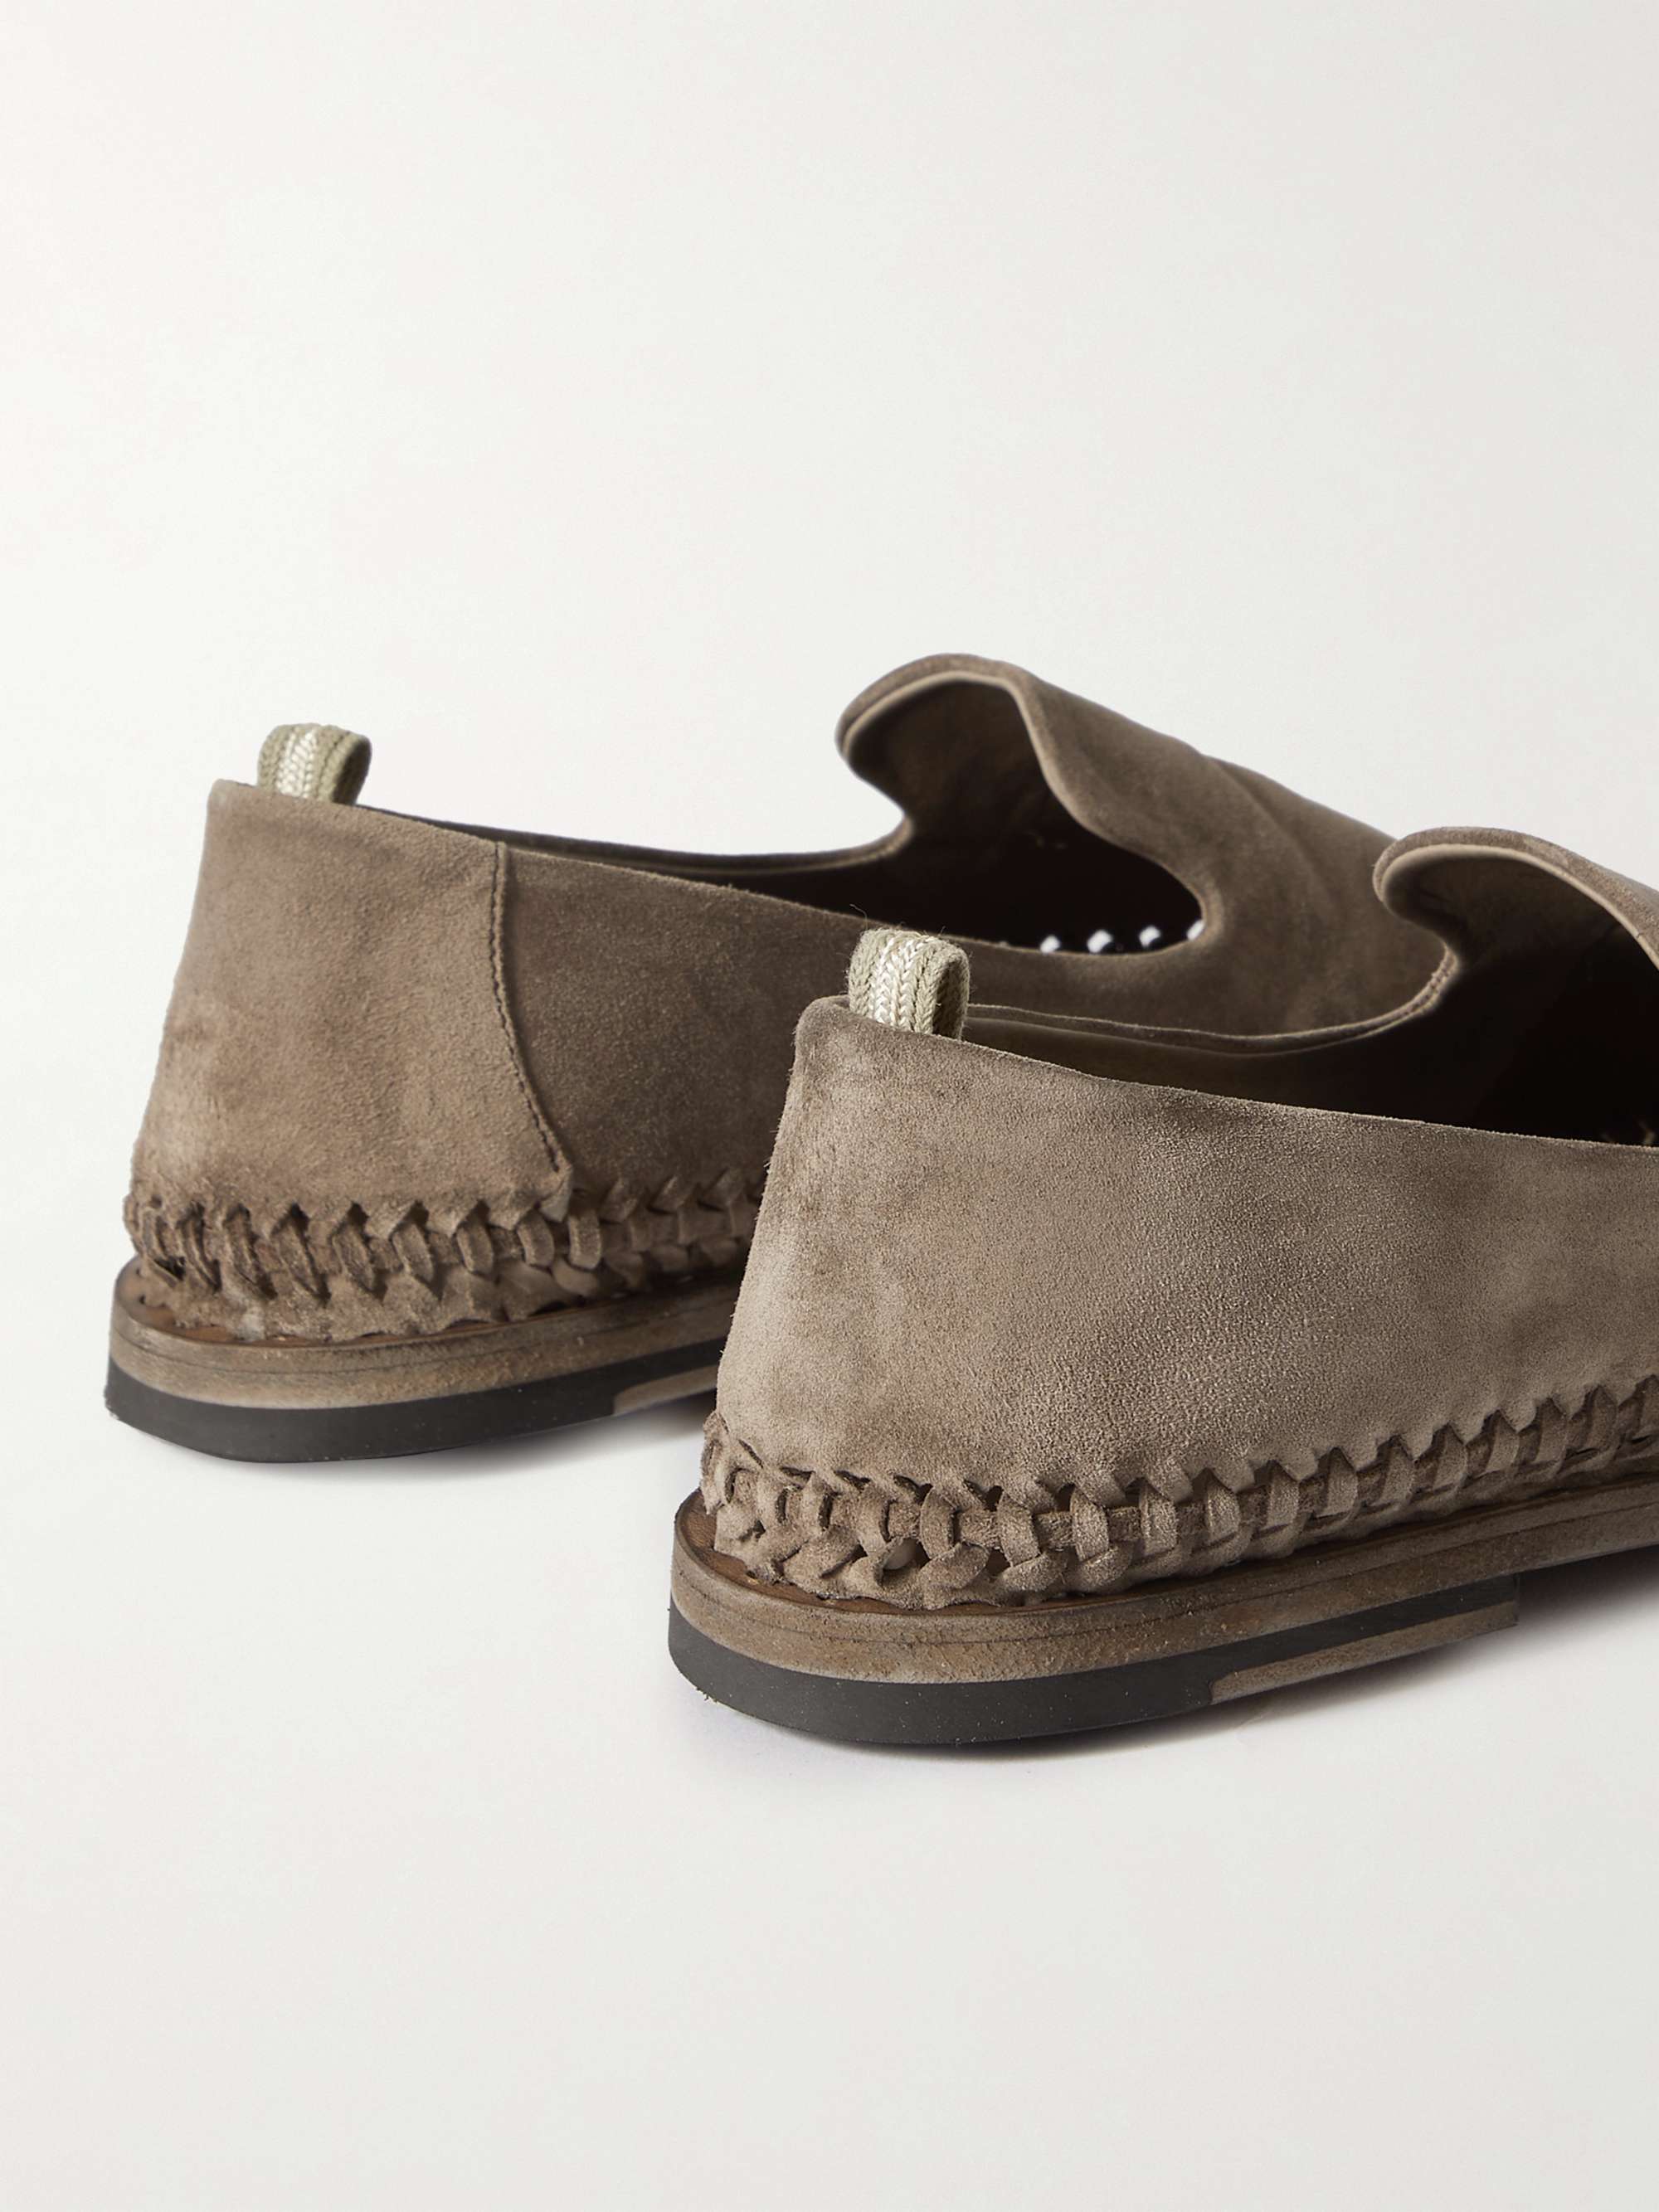 OFFICINE CREATIVE Miles Braided Suede Loafers